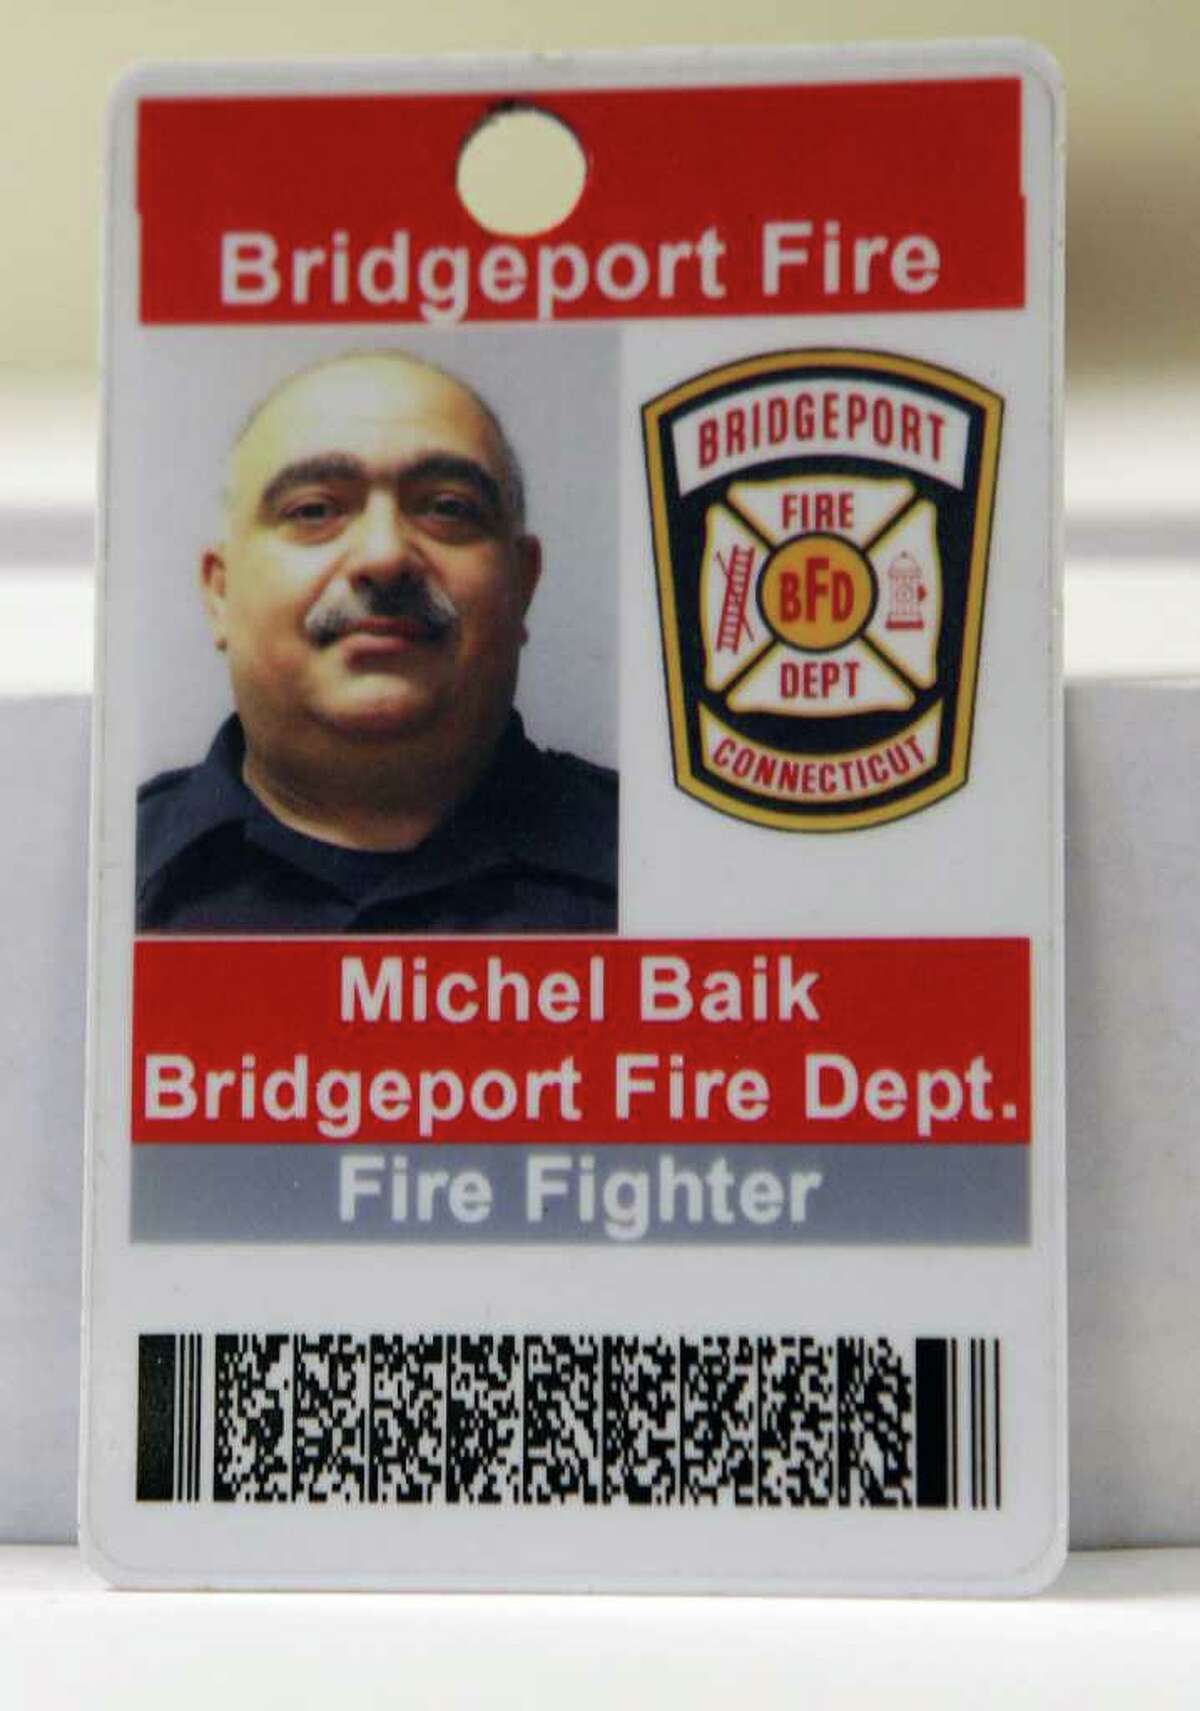 Bridgeport firefighter Michel Baik died while fighting a fire at 41 Elmwood Ave on Saturday, July 24, 2010.